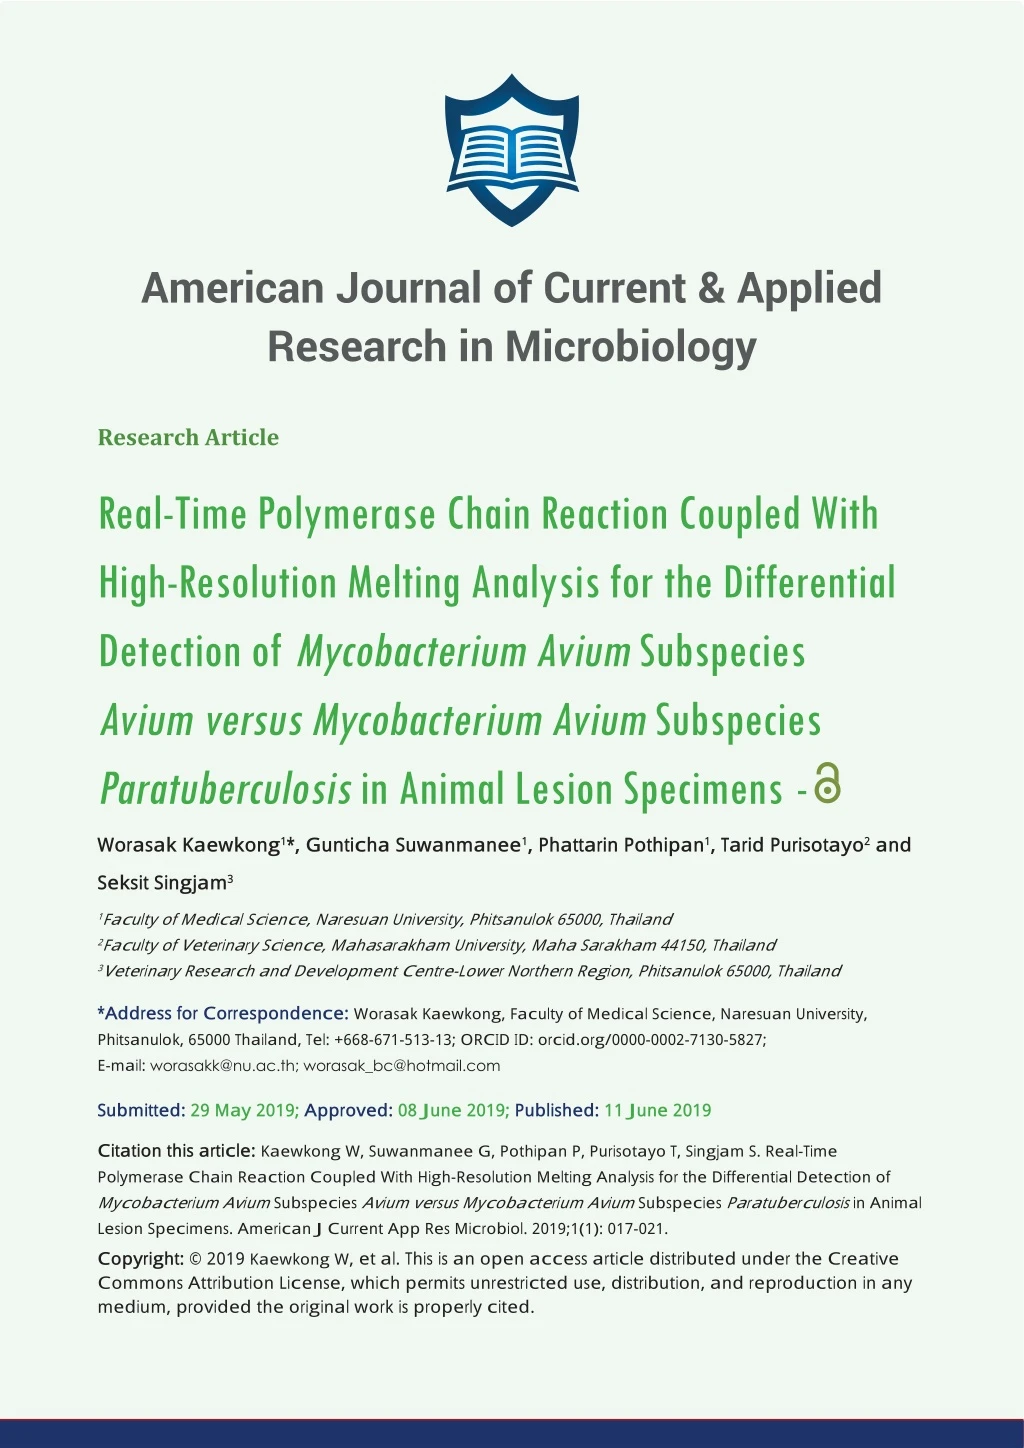 american journal of current applied research